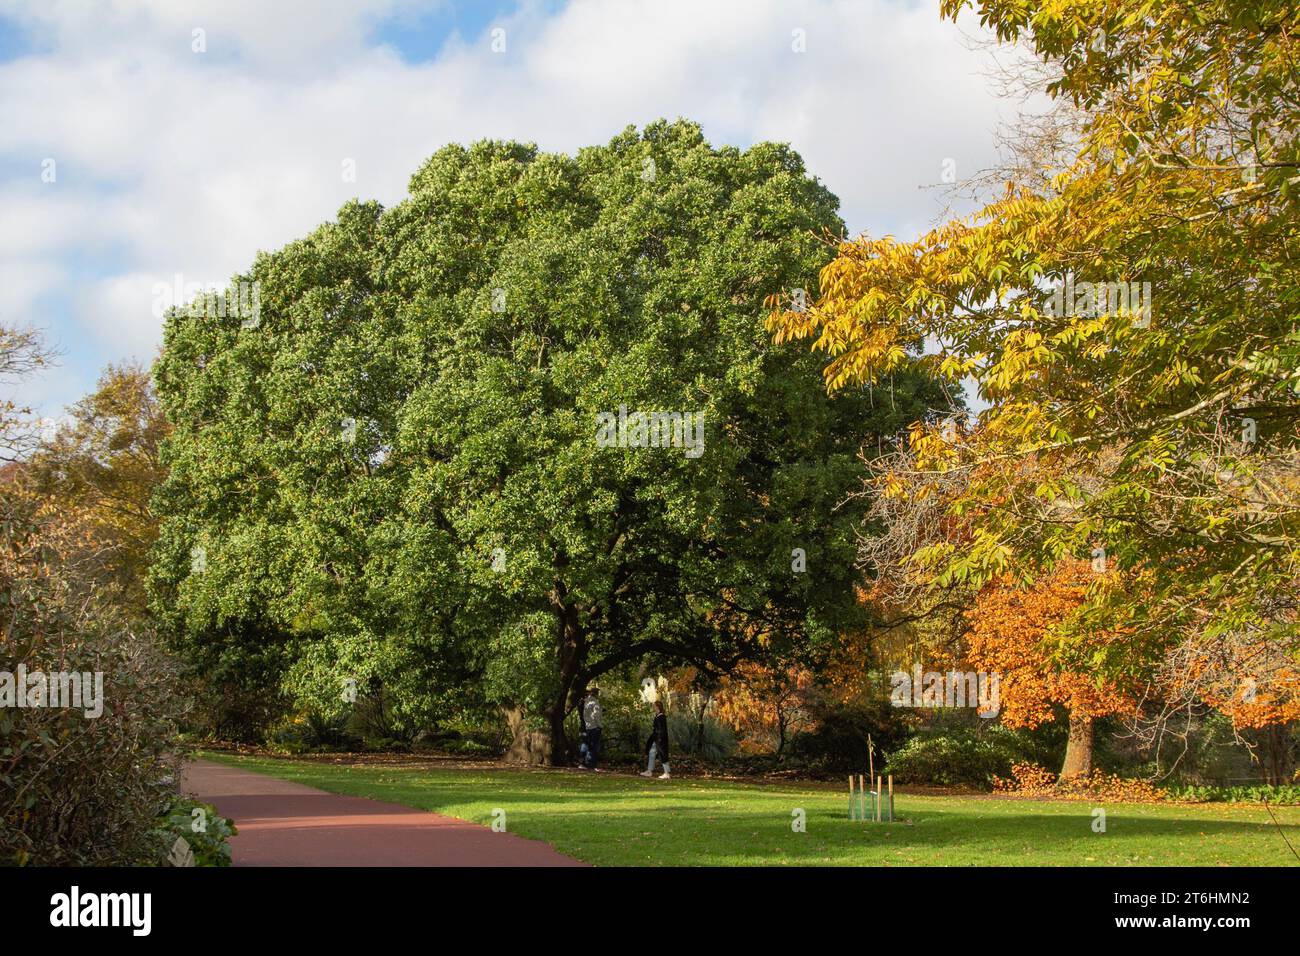 Edinburgh: a magnificent Turner's oak in the Royal Botanic Garden dwarfs two visitors whilst nearby trees display rich autumnal colours. Stock Photo